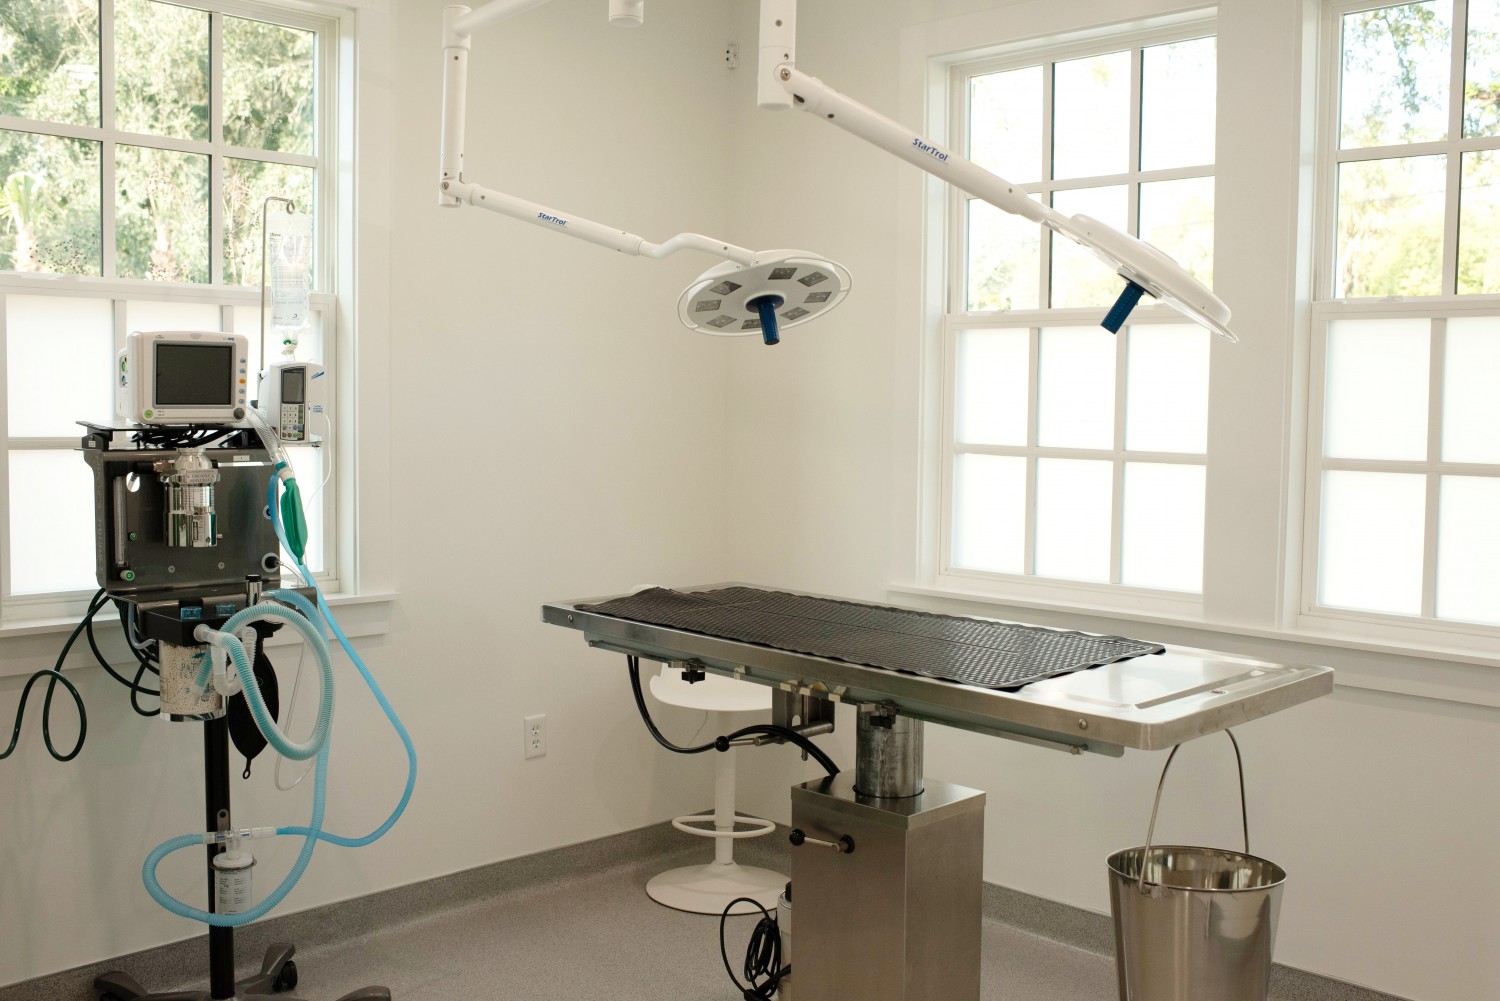 Our Surgical Suite